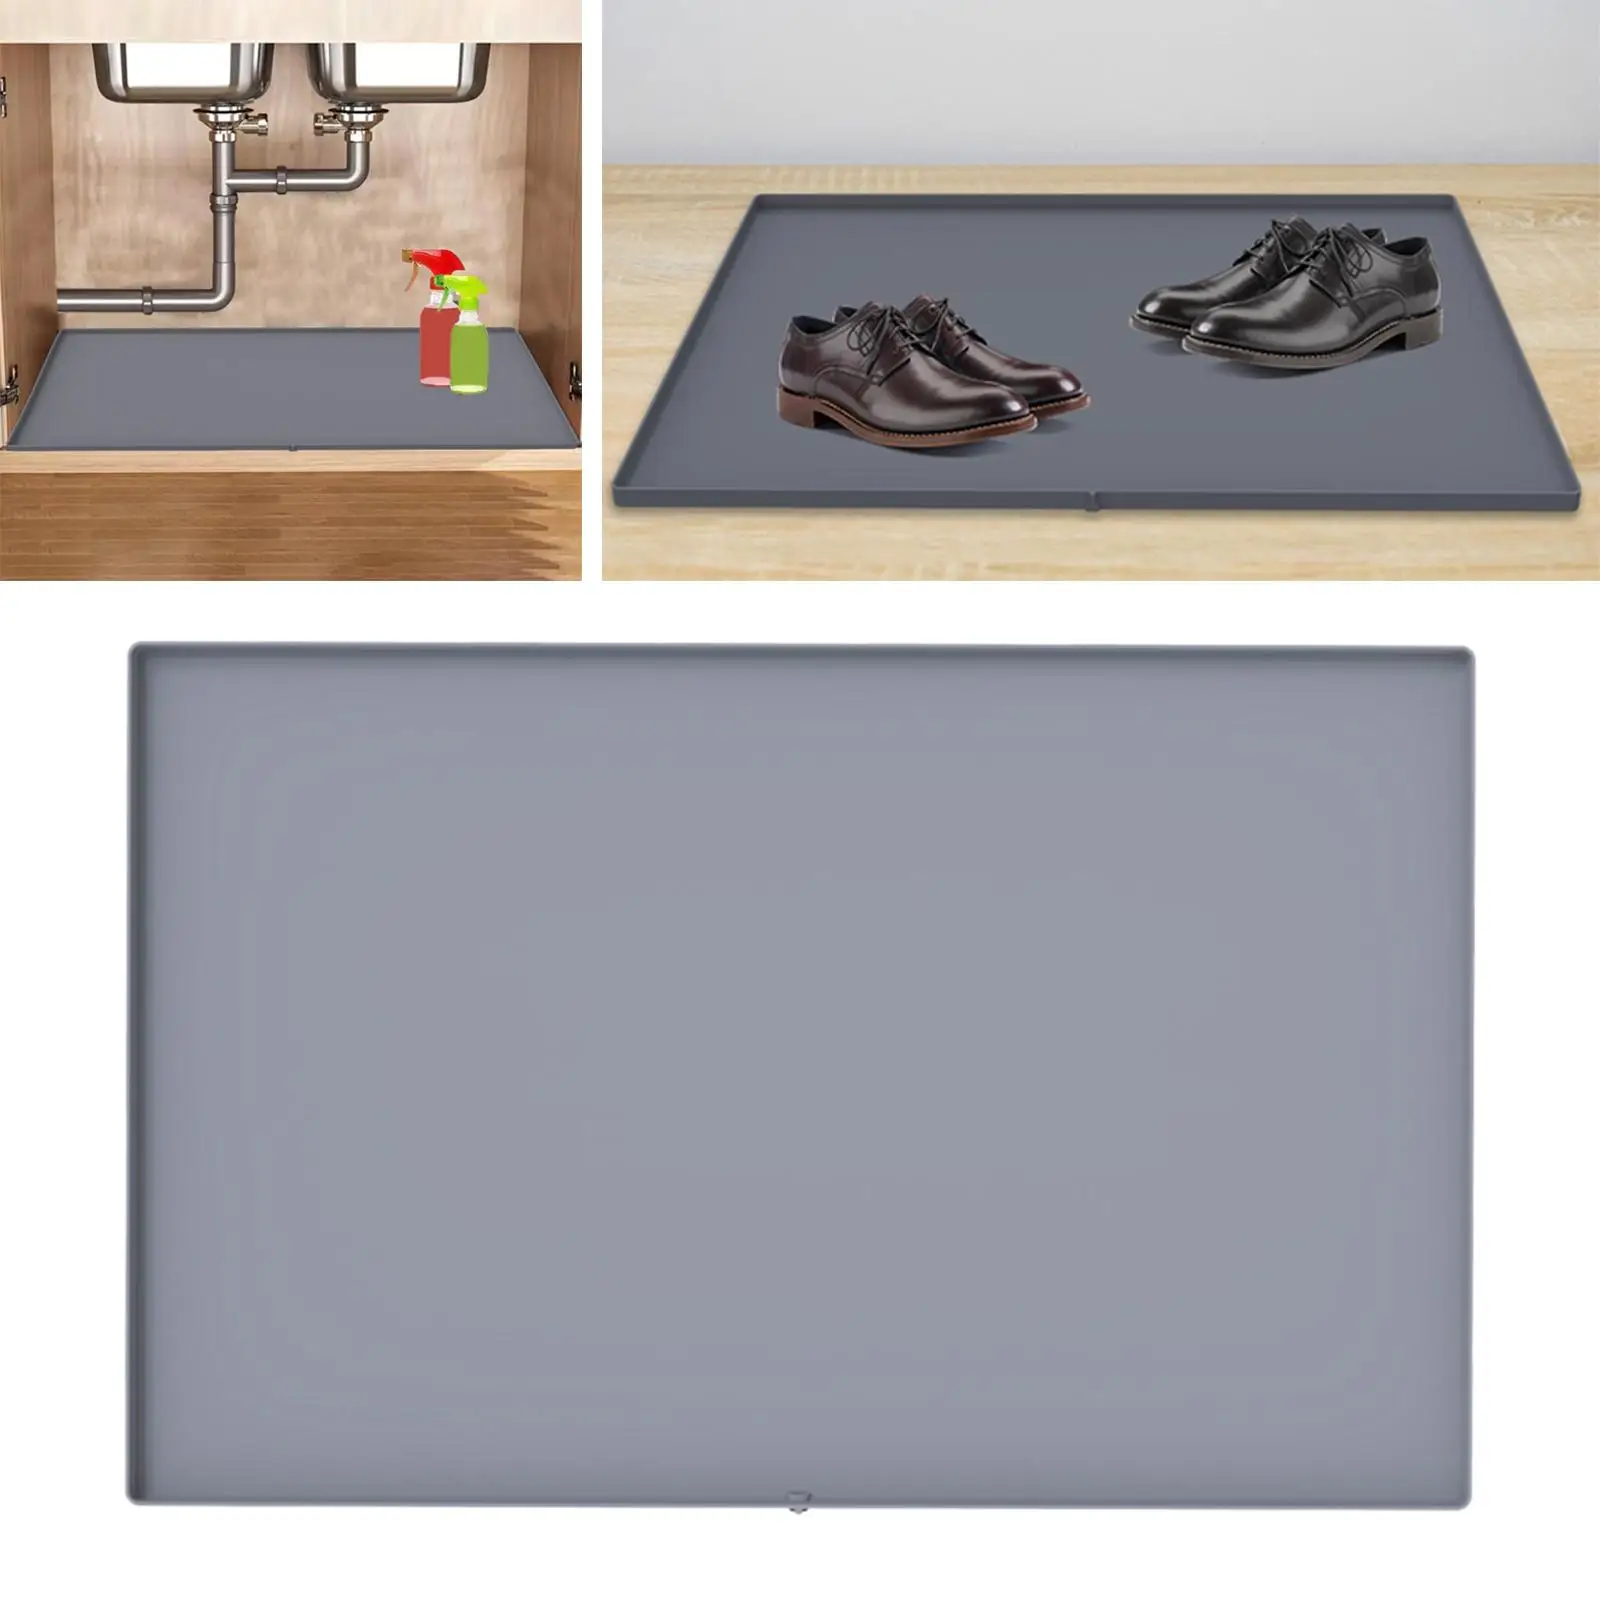 Mat Heat Resistant Oilproof Waterproof Silicone Mat Leakproof Durable Sink Cabinet Protector Mats for Kitchen Bathroom